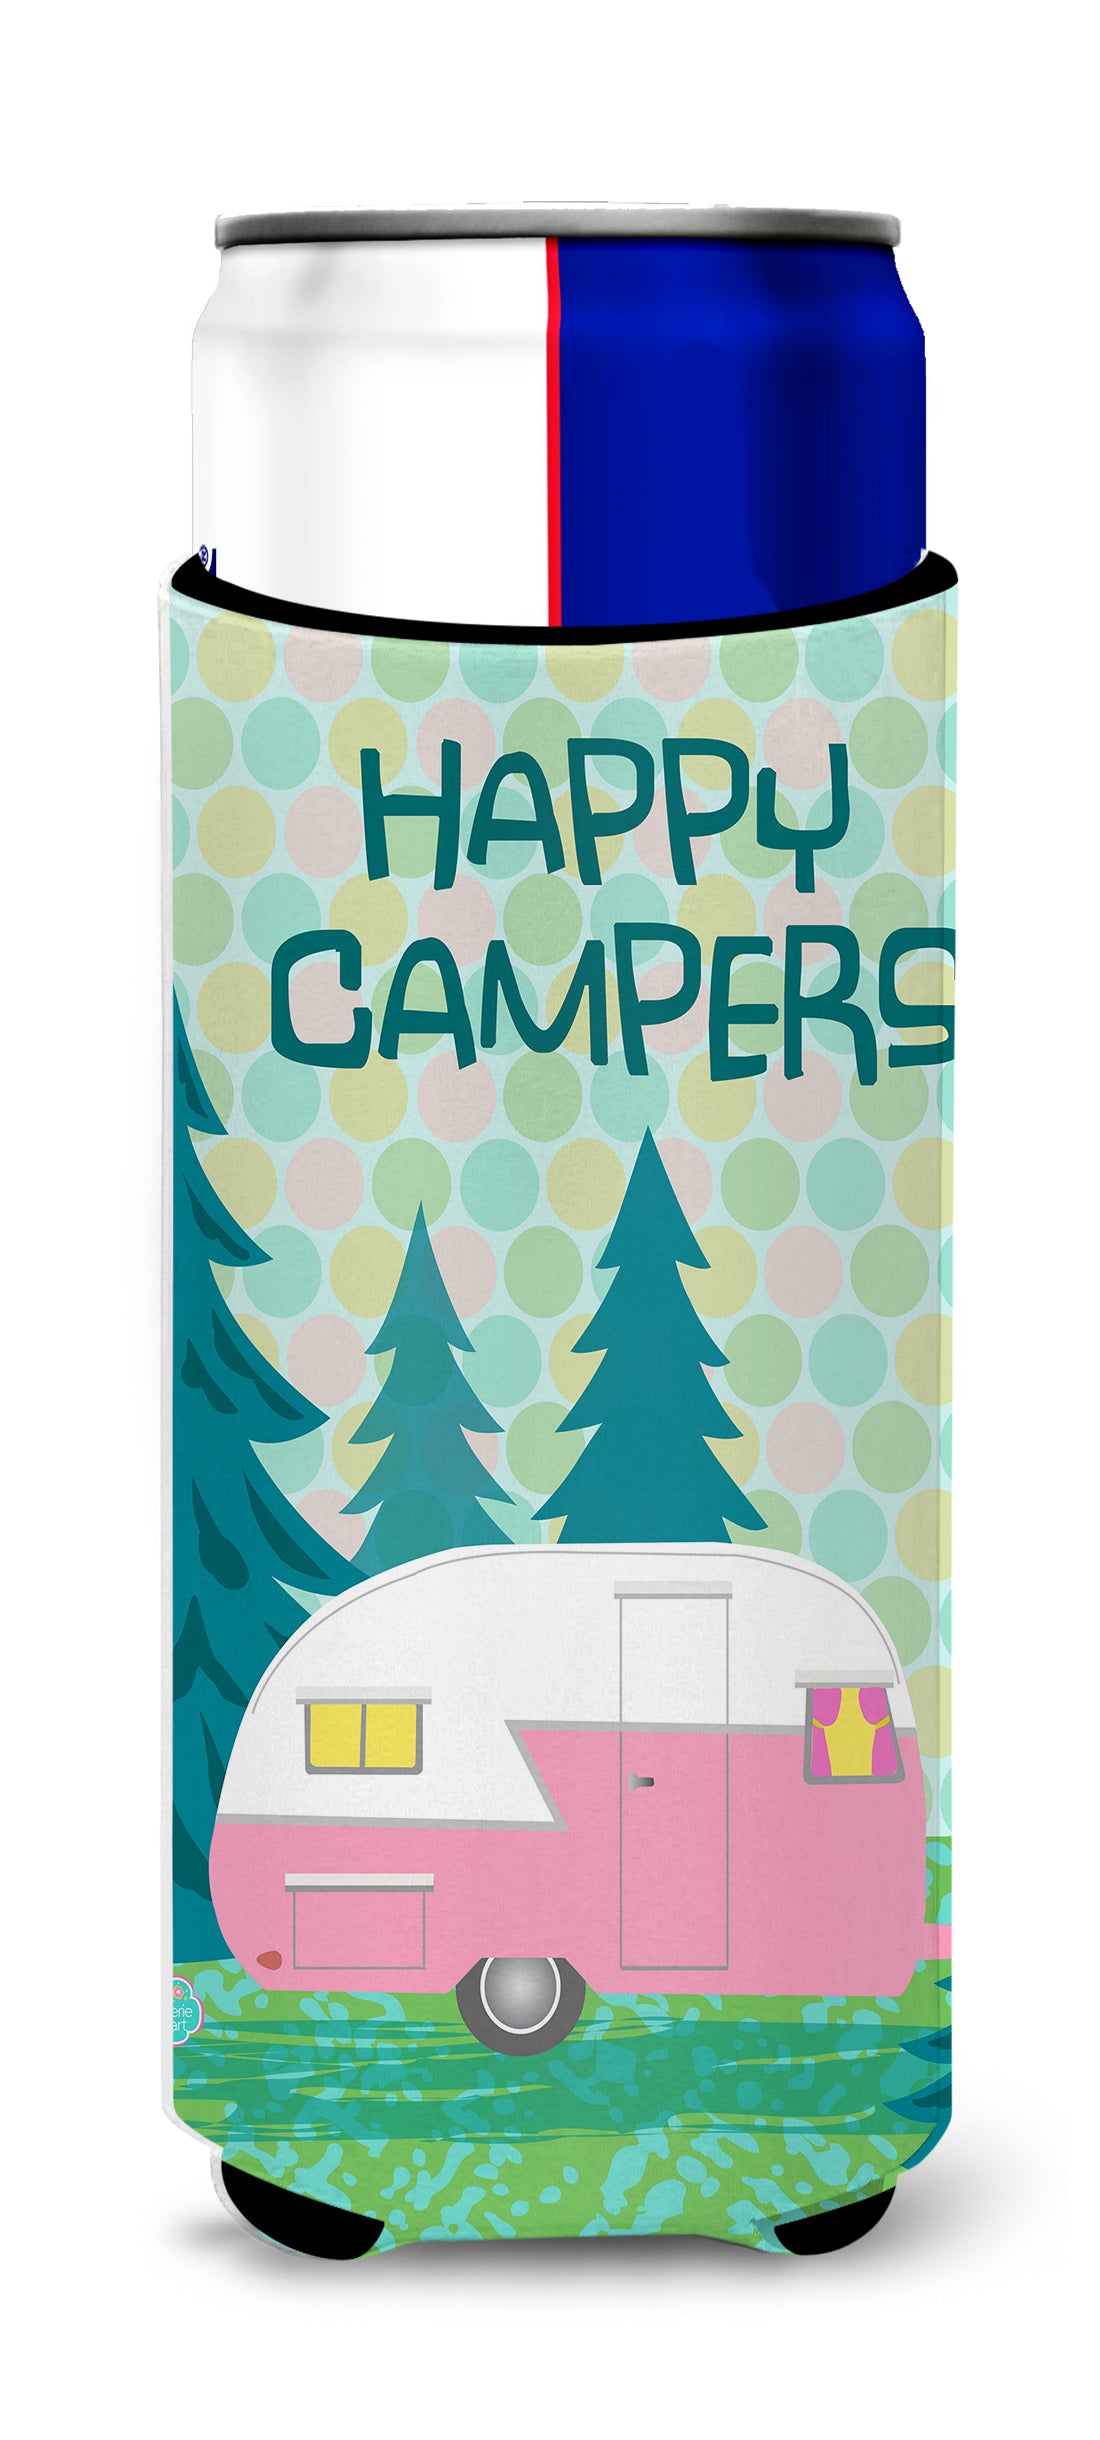 Happy Campers Glamping Trailer Ultra Beverage Insulators for slim cans VHA3004MUK